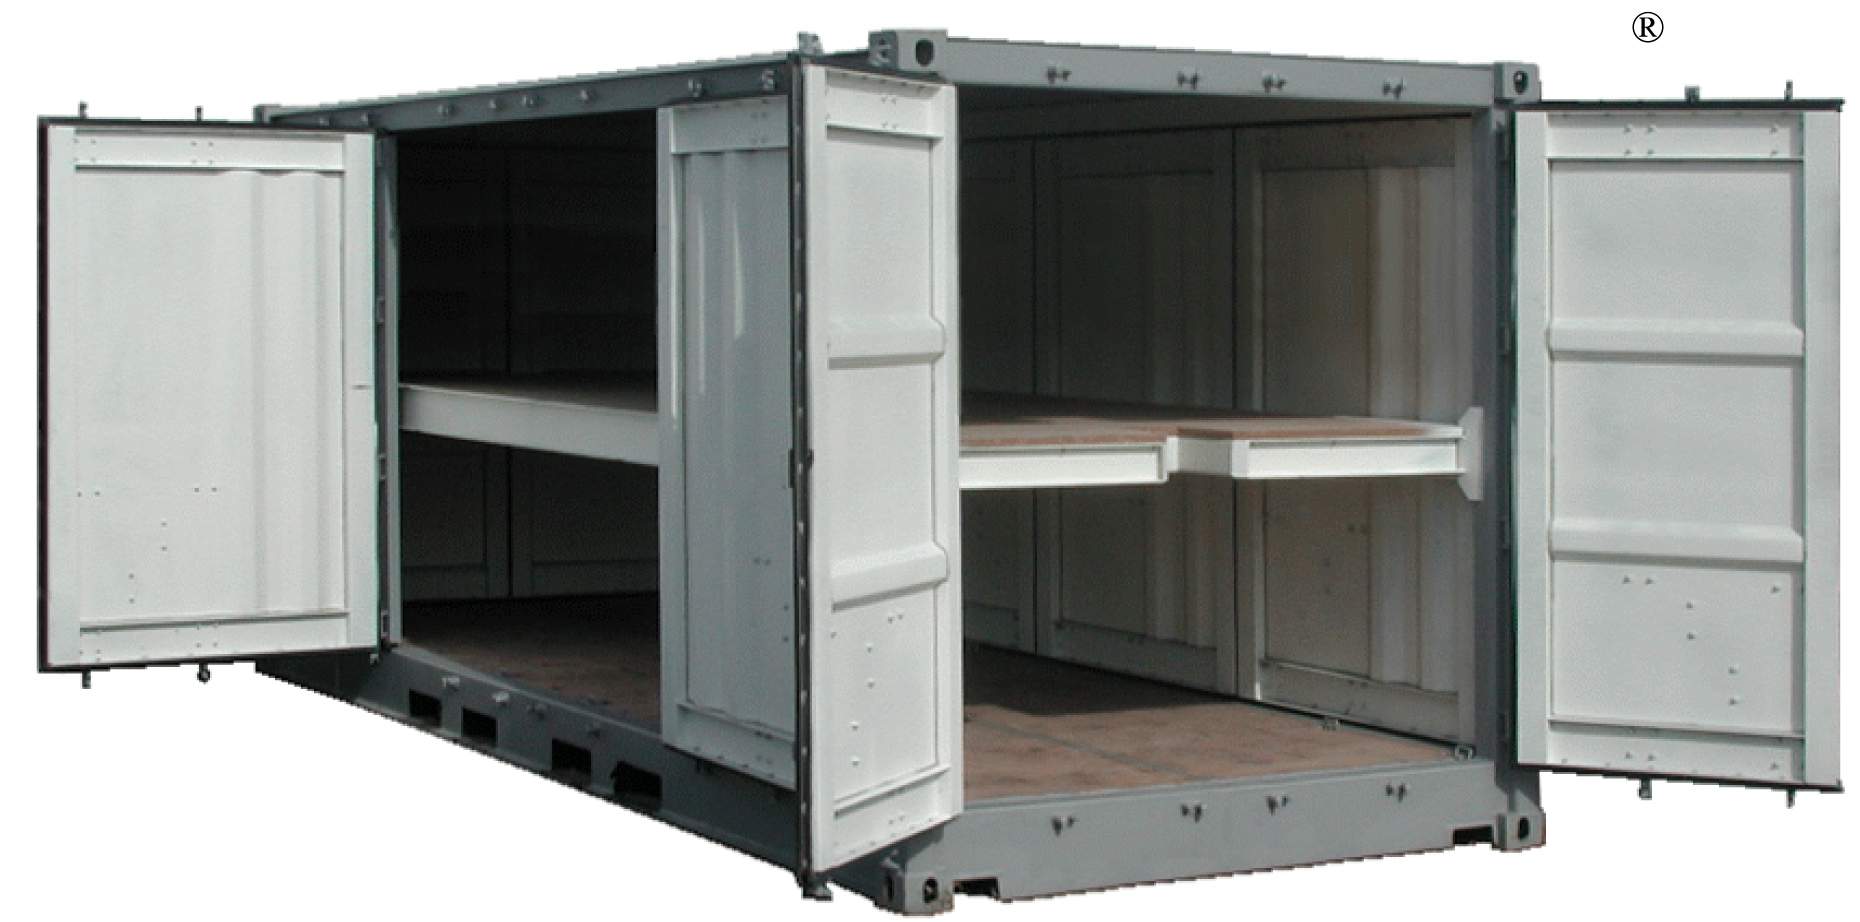 20’ x 8’6” Dry Freight ISO Container - All Access with One Tween Deck